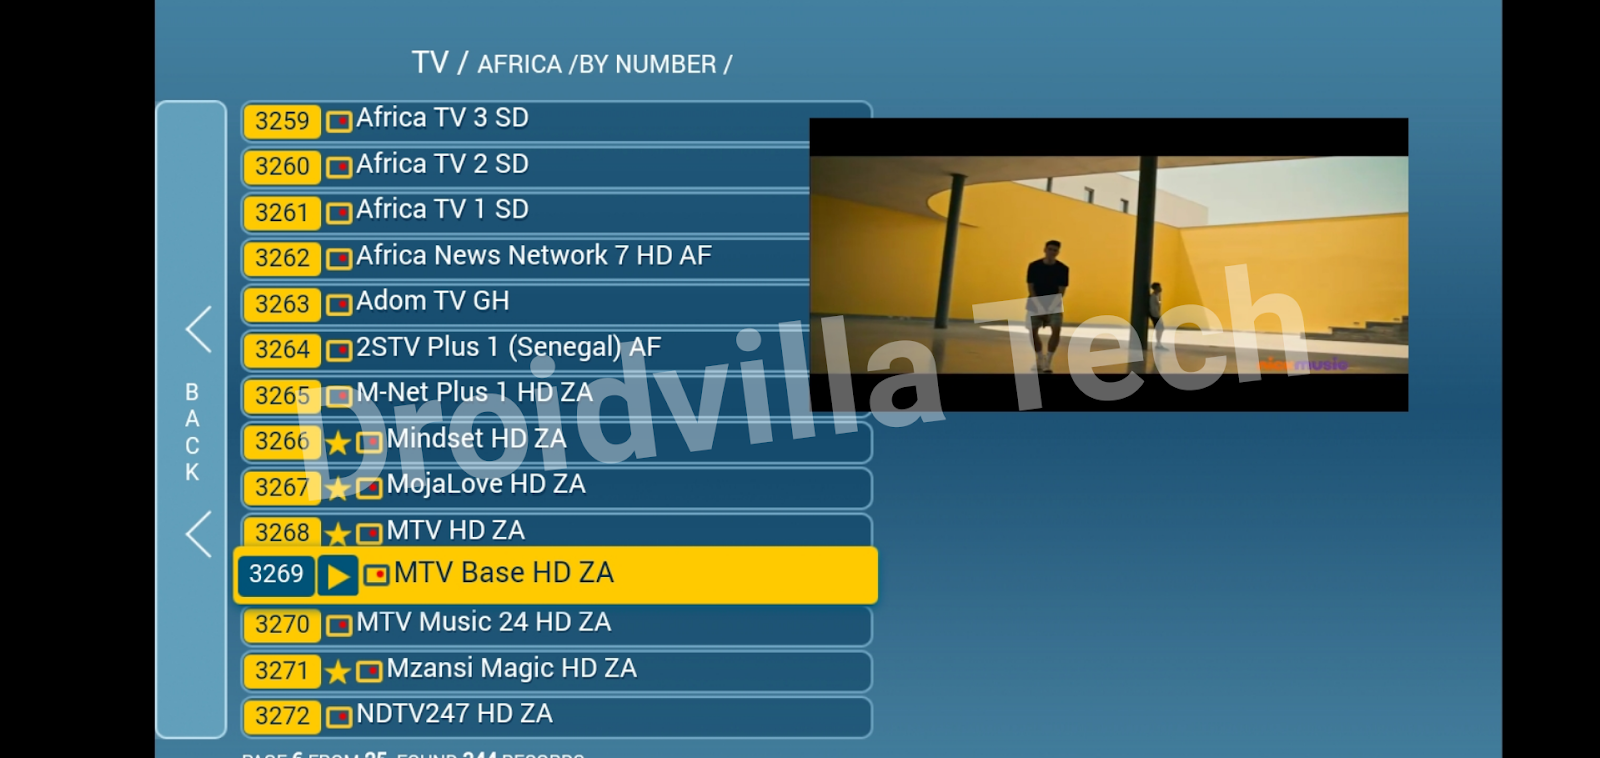 working-stb-configuration-how-to-configure-and-setup-the-latest-hacked-dstv-apk-app-josh-dstv-droidvilla-technology-solution-android-apk-phone-reviews-technology-updates-tipstricks